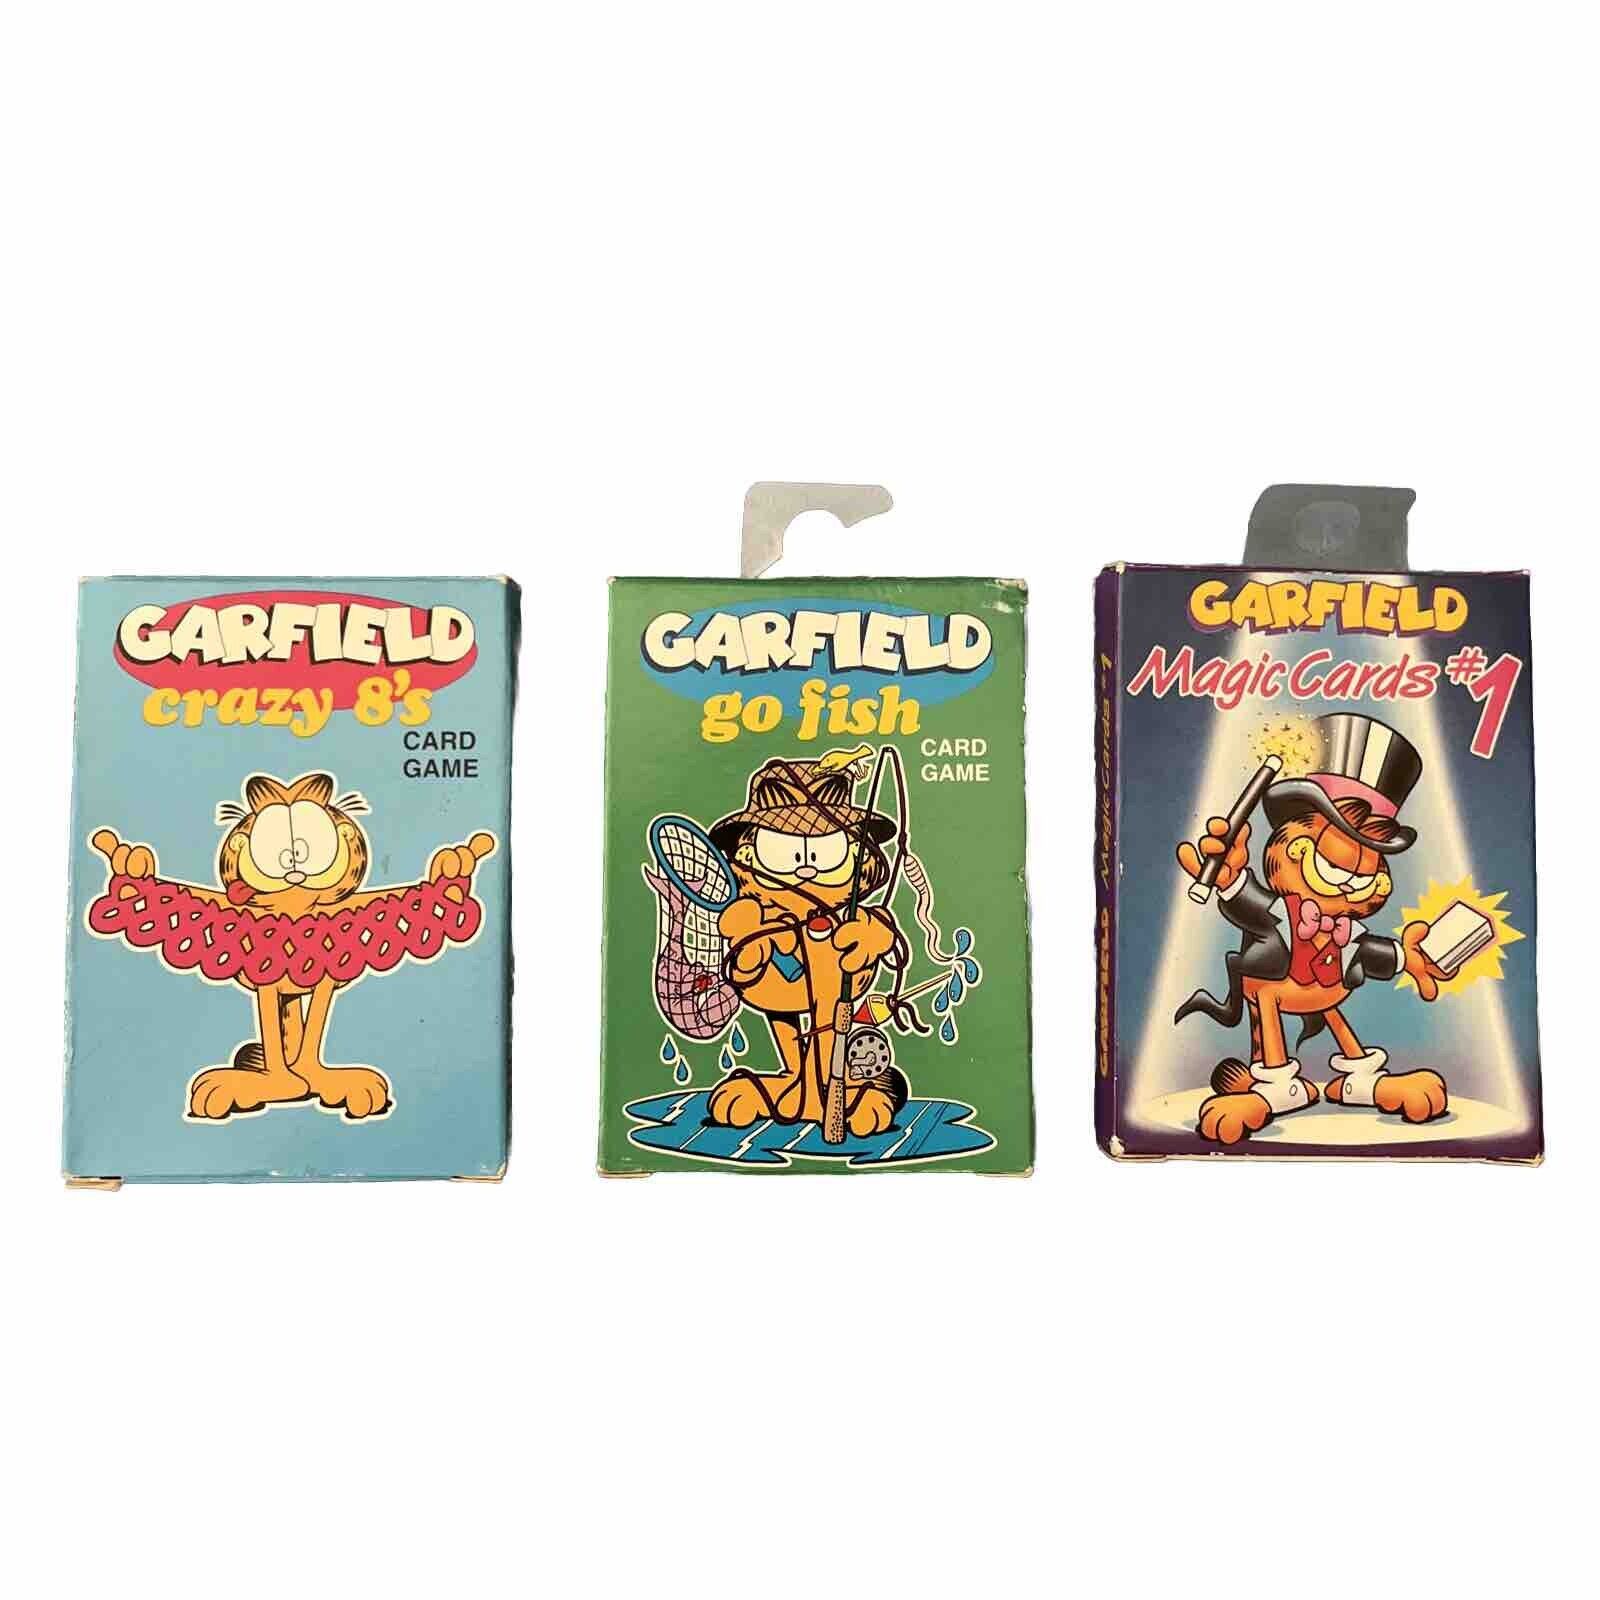 Vintage Garfield Card Games From 1990’s Crazy 8s, Go Fish & Magic Card Set